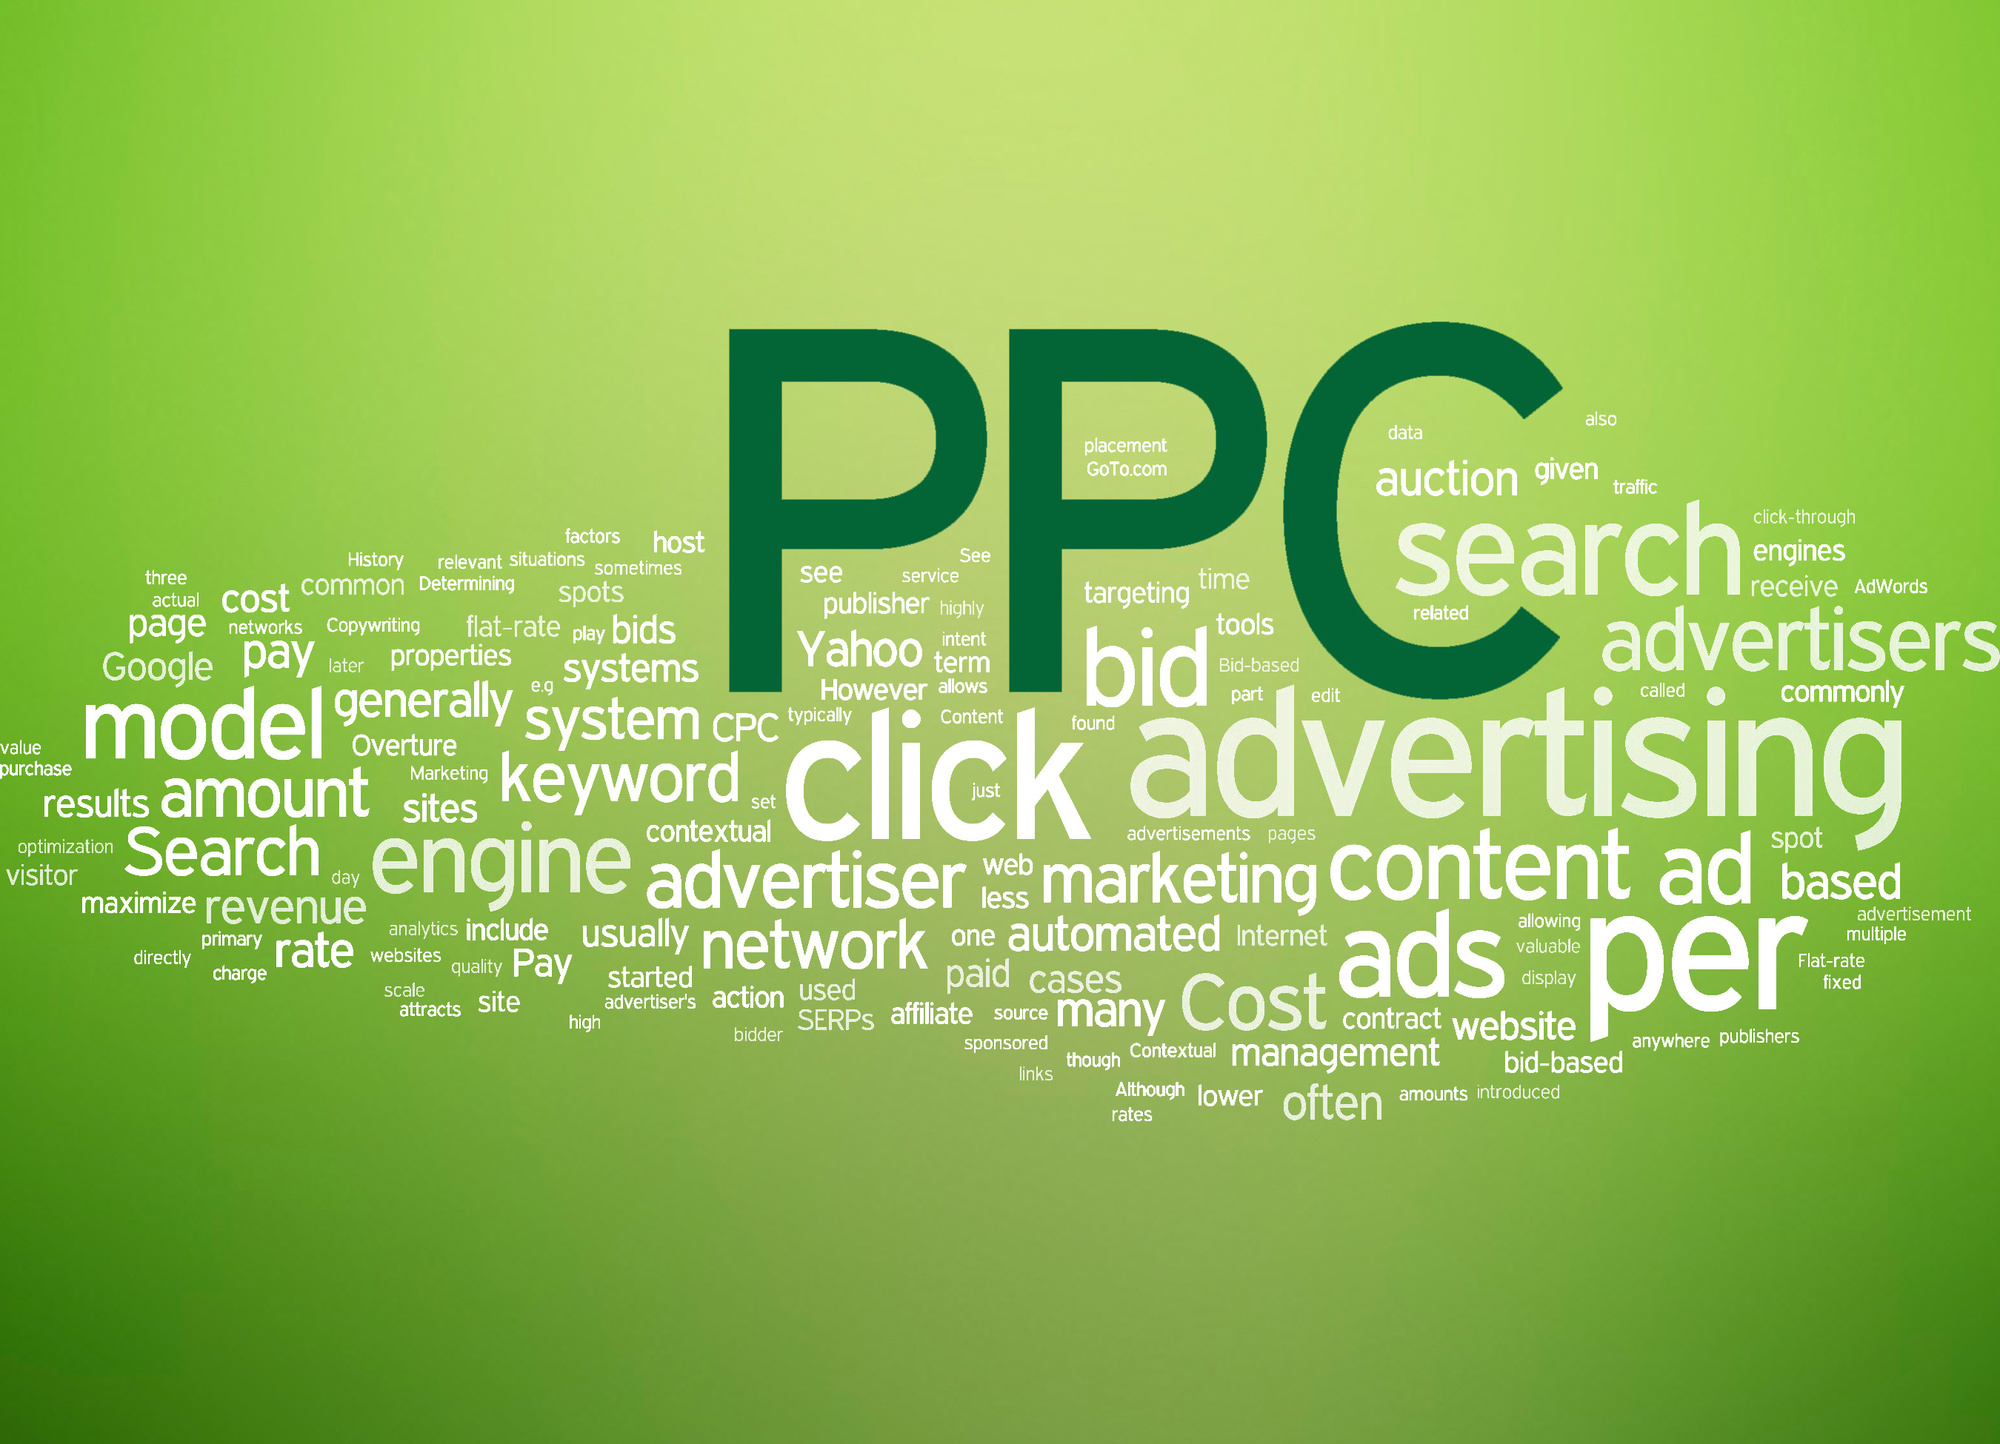  A word cloud image with green text on a light green background. The words are related to PPC advertising and include 'PPC', 'Search', 'Advertising', 'Content', 'Ad', 'Campaign', 'Keyword', 'Bid', 'Placement', 'Targeting', 'Cost', 'Optimization', 'Data', 'Analysis', and 'Tools'.